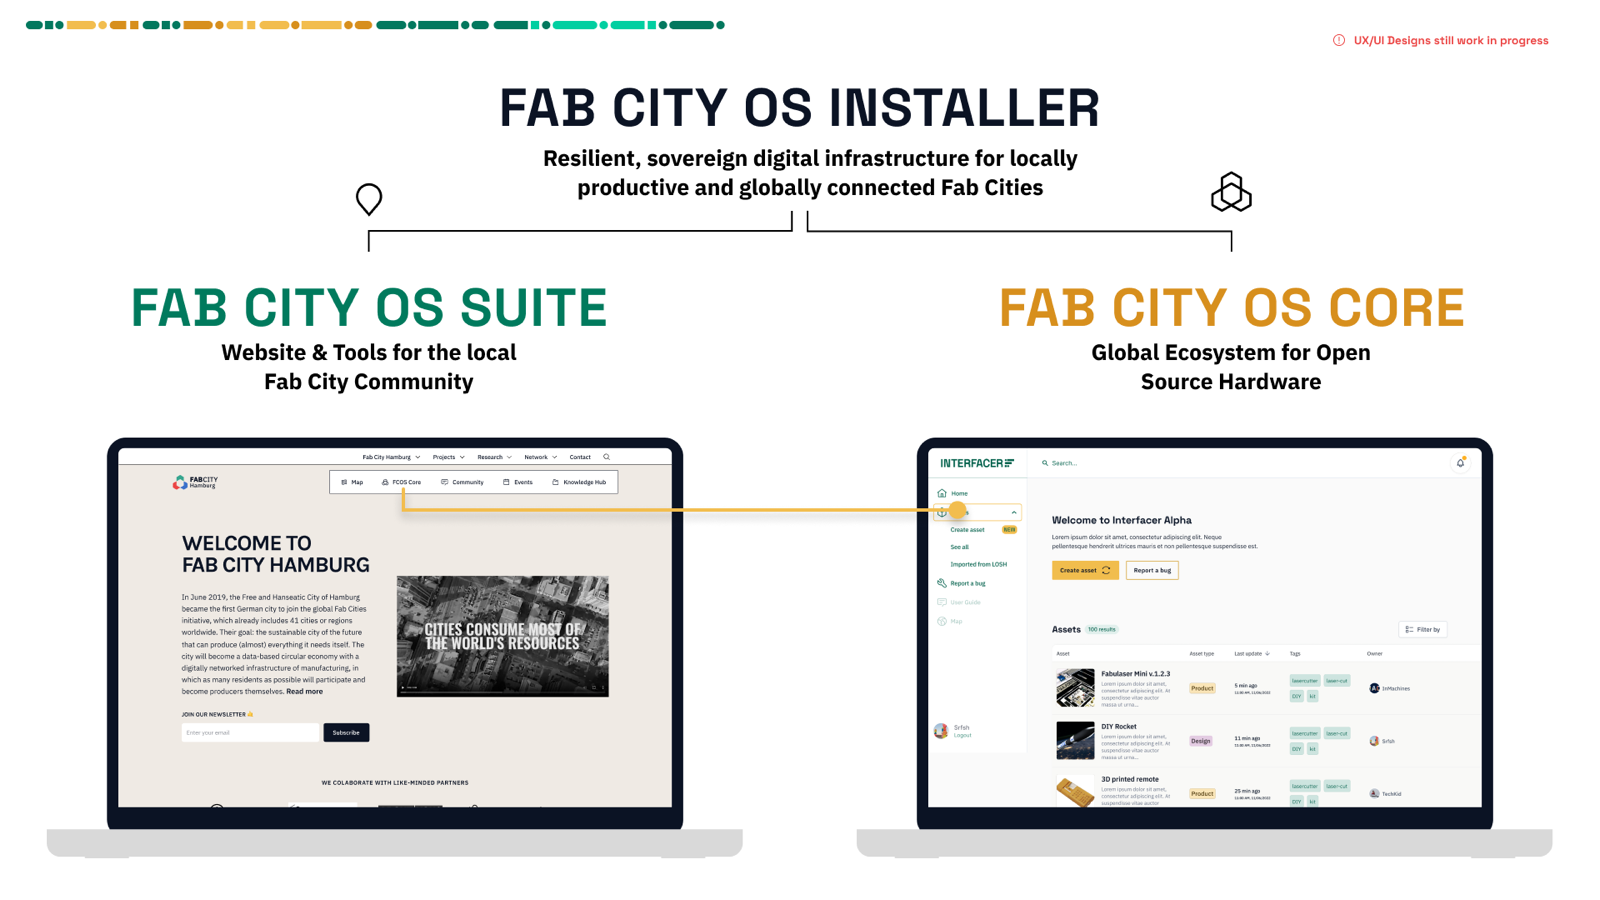 Fab City OS is a collection of different open source software solutions, which are divided into the "Fab City OS Suite" and the "Fab City OS Core" network. Using the Fab City OS Installer, all Fab City OS software can be hosted locally to provide Fab Cities with a high level of digital sovereignty.